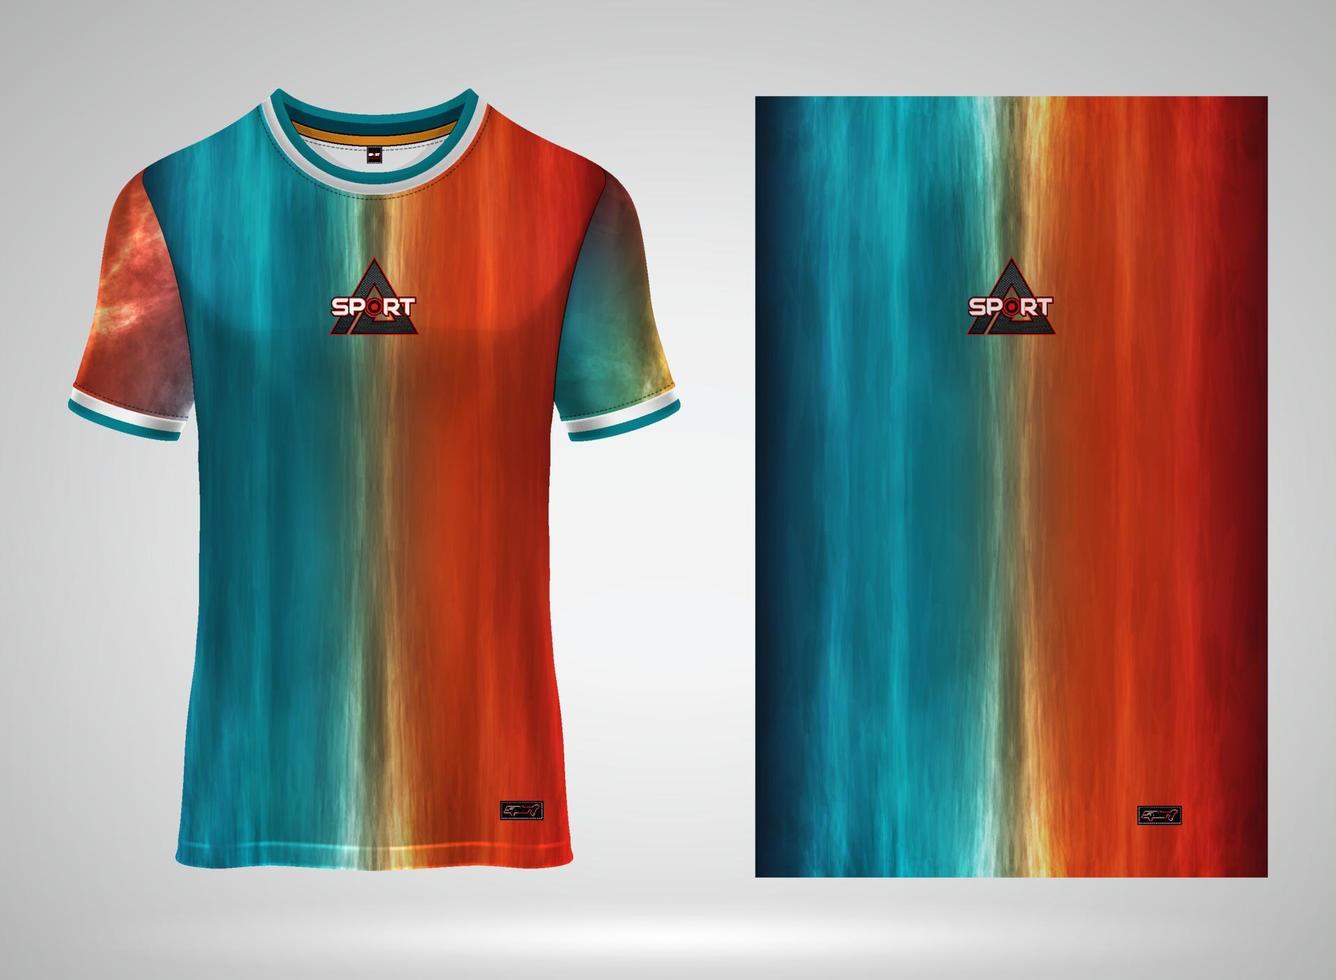 Sport background texture pattern. Sport pattern fabric textile. Sport jersey t-shirt. Soccer jersey mockup for sports club. vector